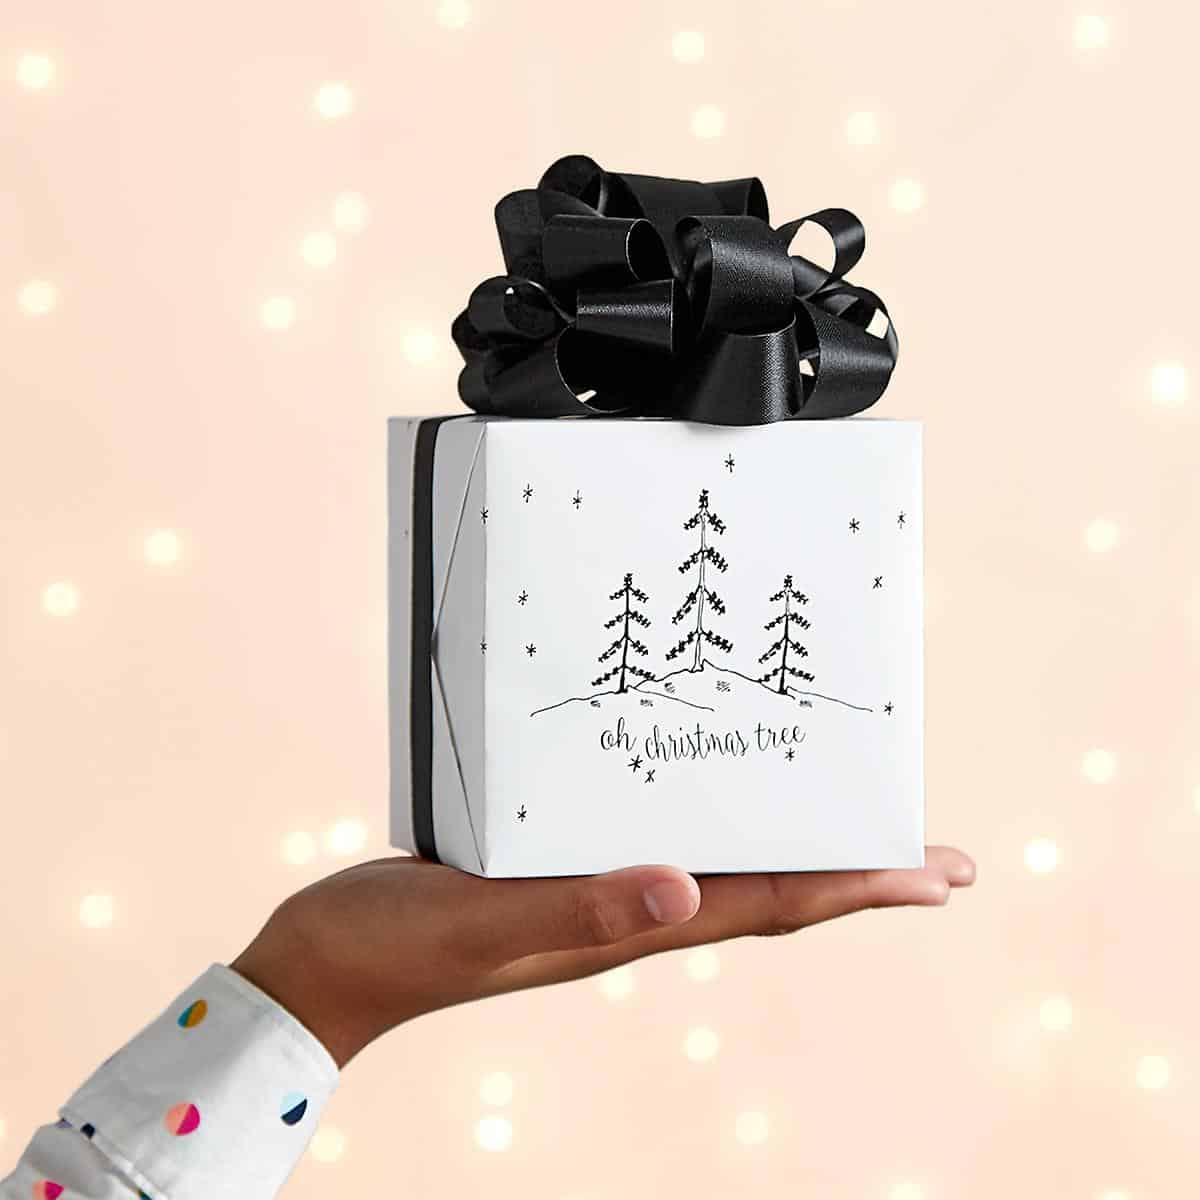 2017 Gift Giving Guide